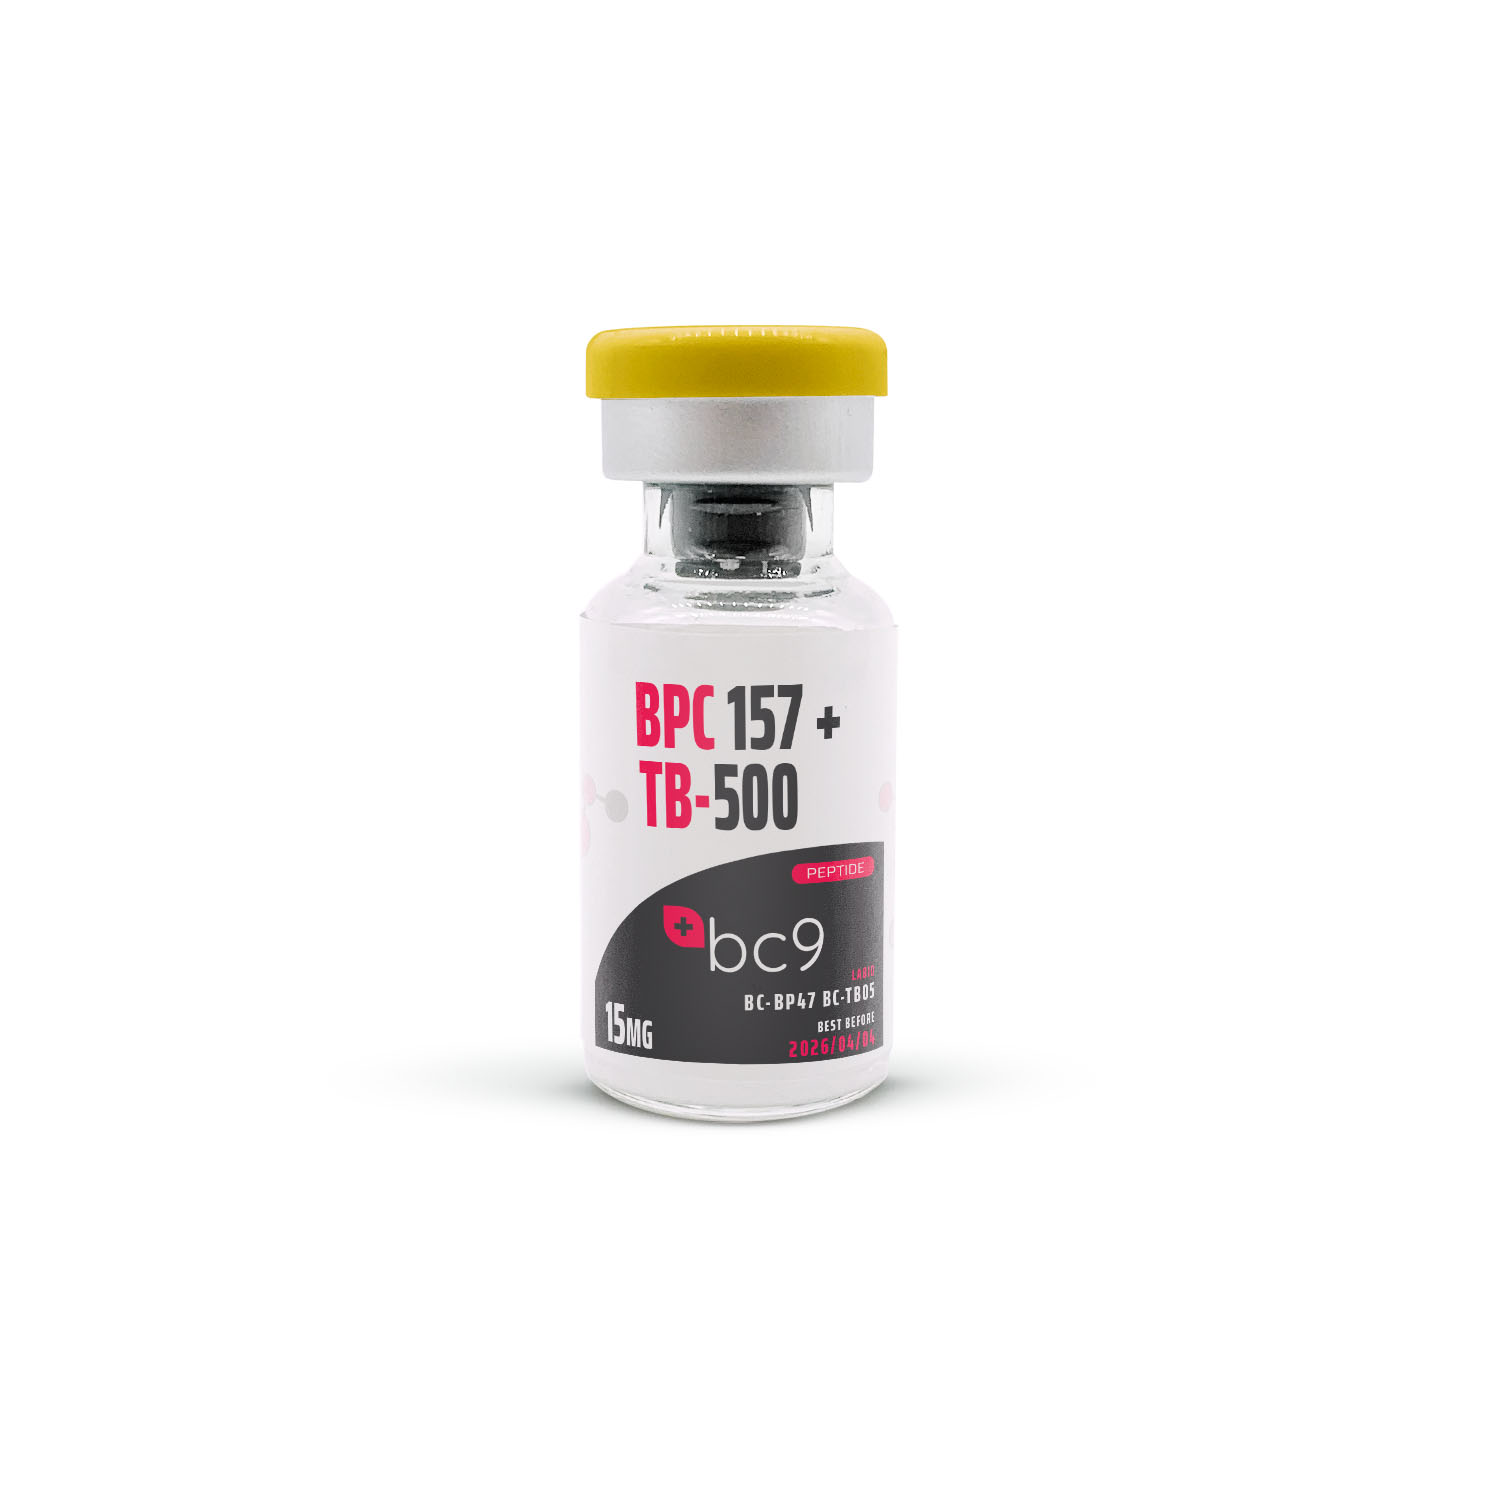 Buy BPC-157 + TB-500 Peptide For Sale | BC9.org